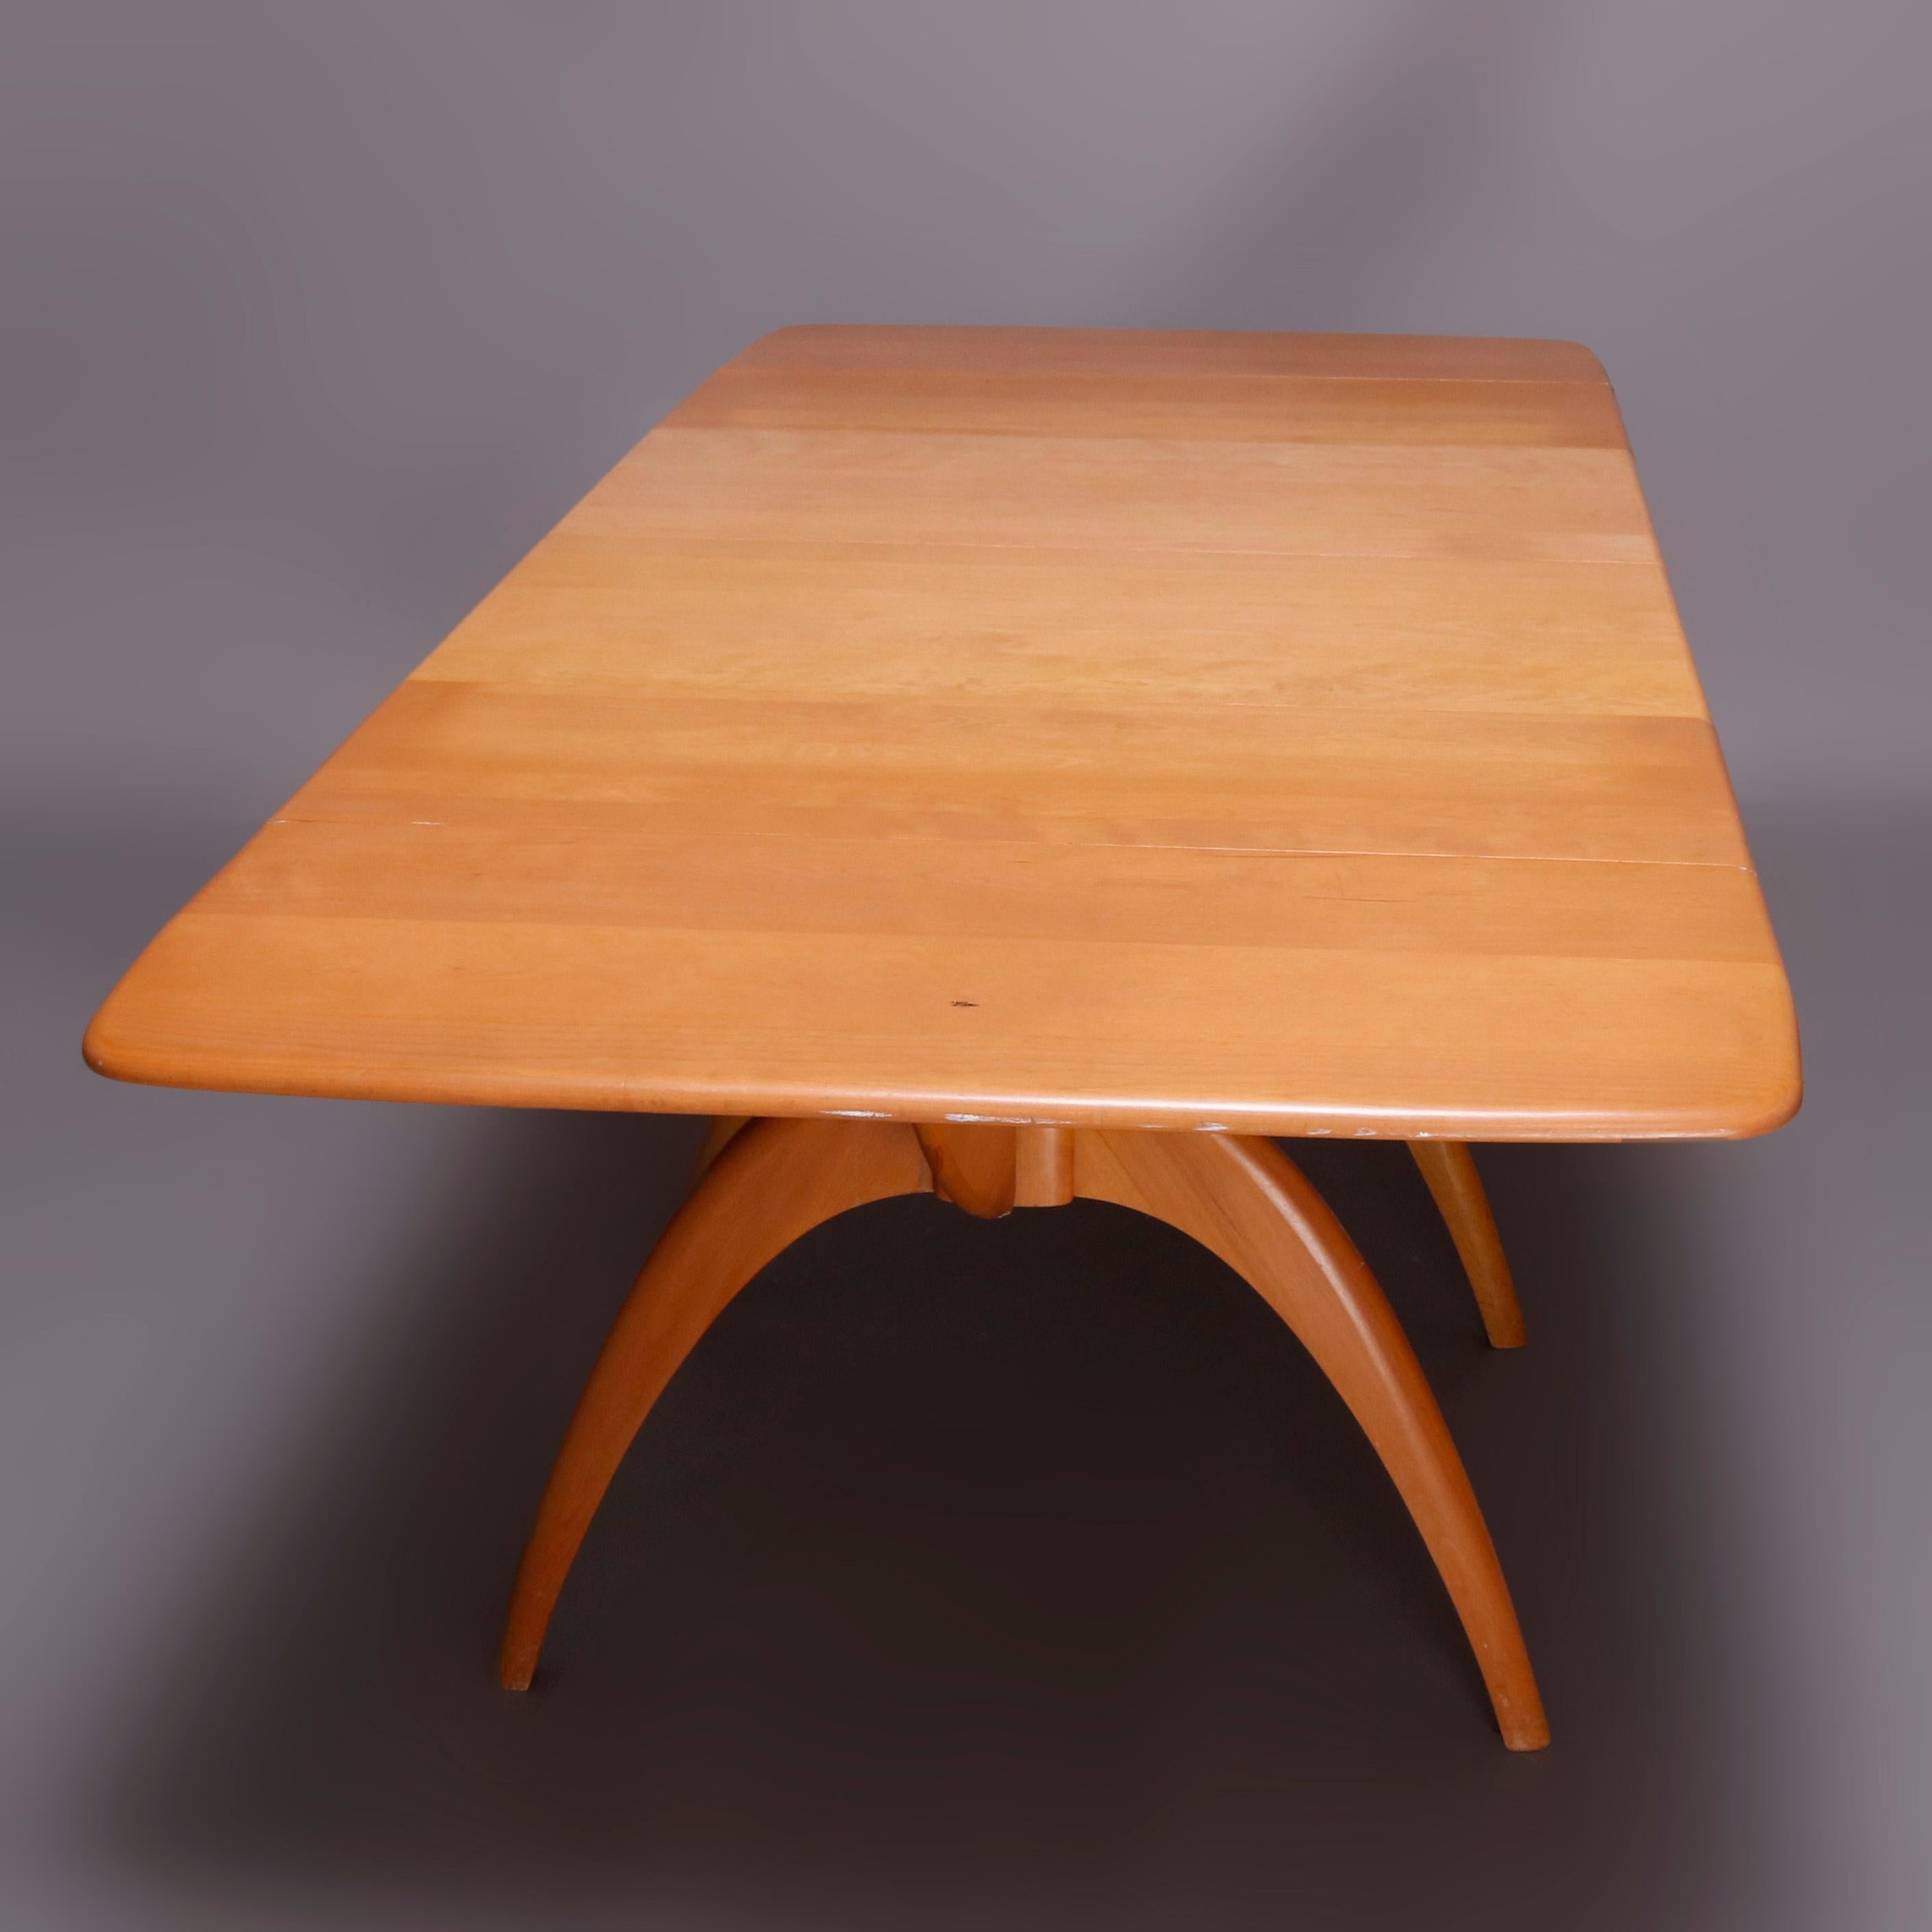 A Mid-Century Modern dining set by Heywood Wakefield offers birch construction with extension table in Wish Bone pattern having drop leaf top with two leaves surmounting convex legs, Champagne finish, maker mark as photographed, mid-20th